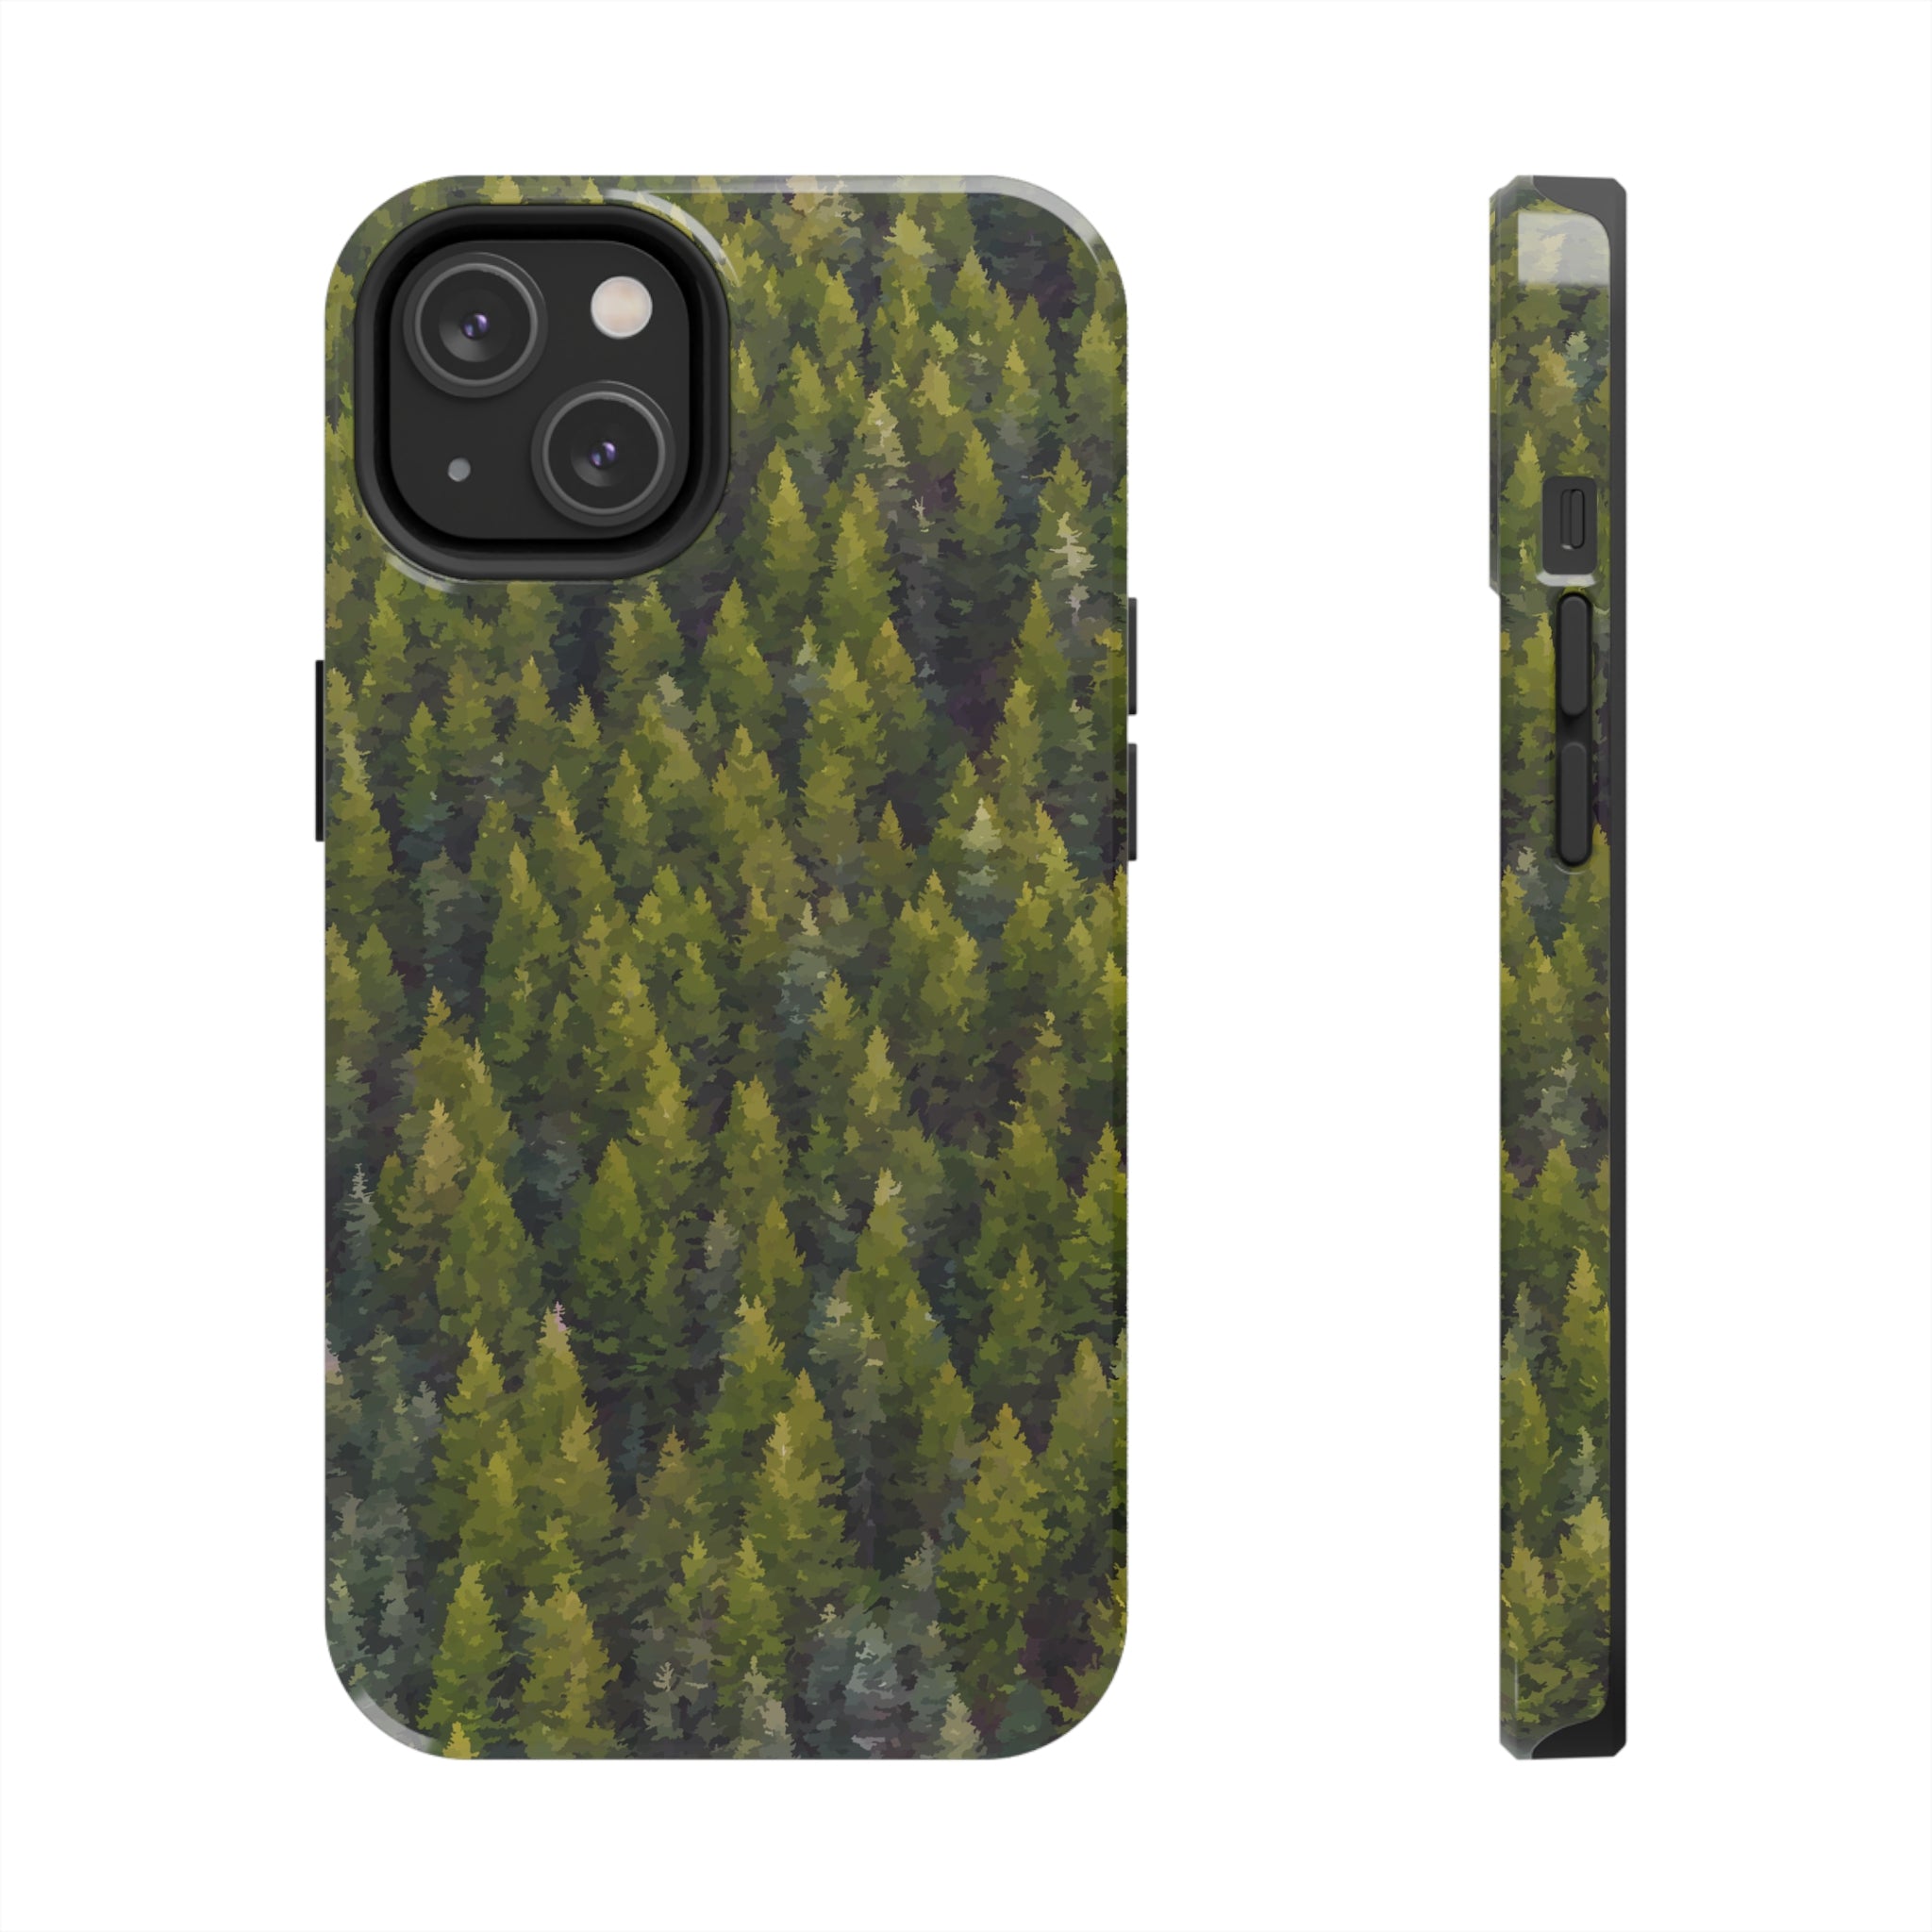 Main image of Forest Canopy iPhone Case